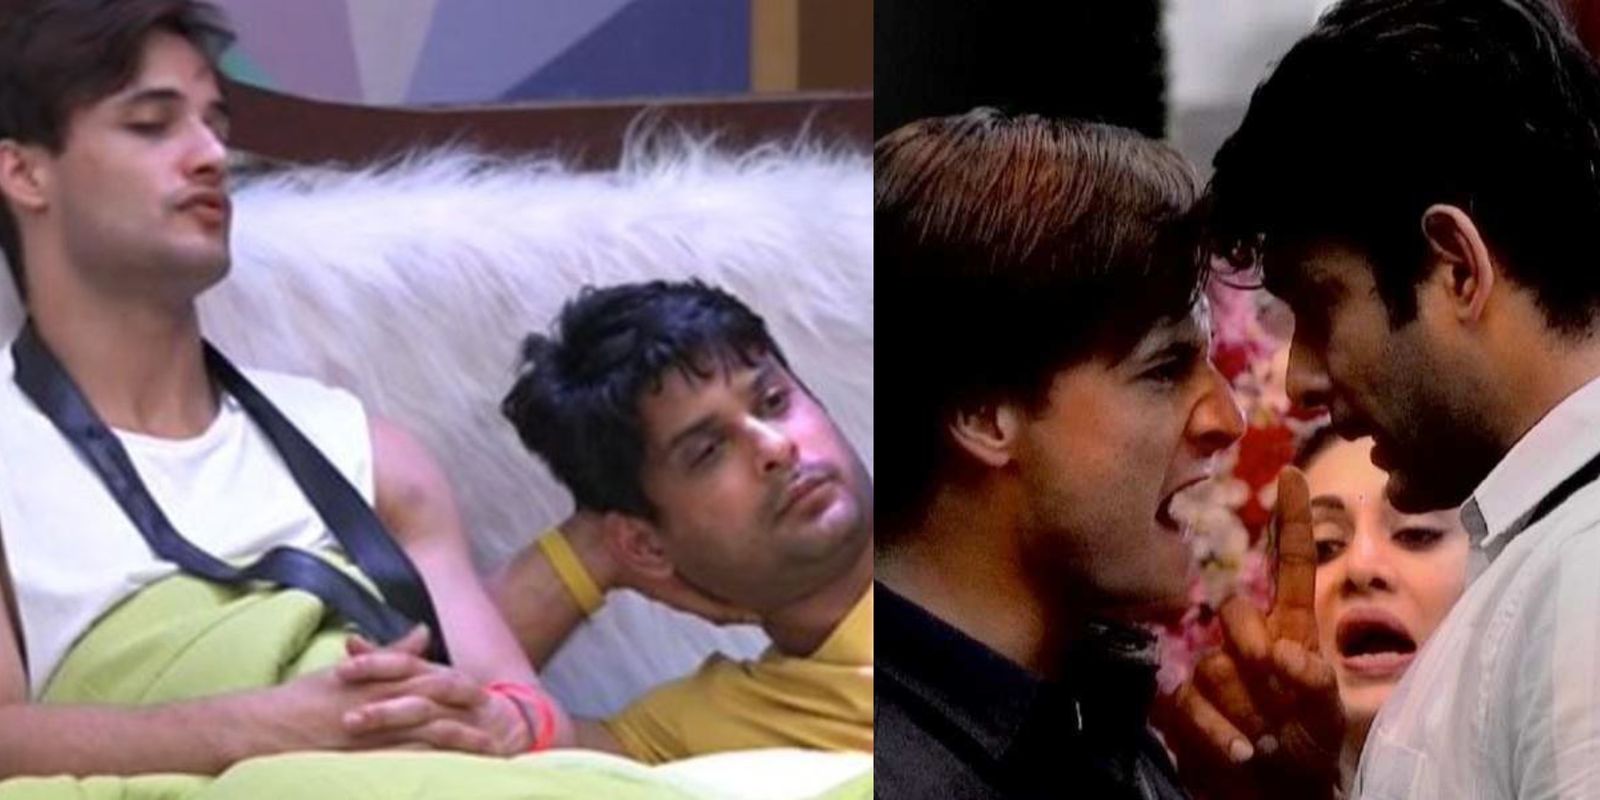 Bigg Boss 13: Asim’s Brother Defends His Friendship With Sidharth Shukla Even As Video Of Their Physical Fight Emerges!